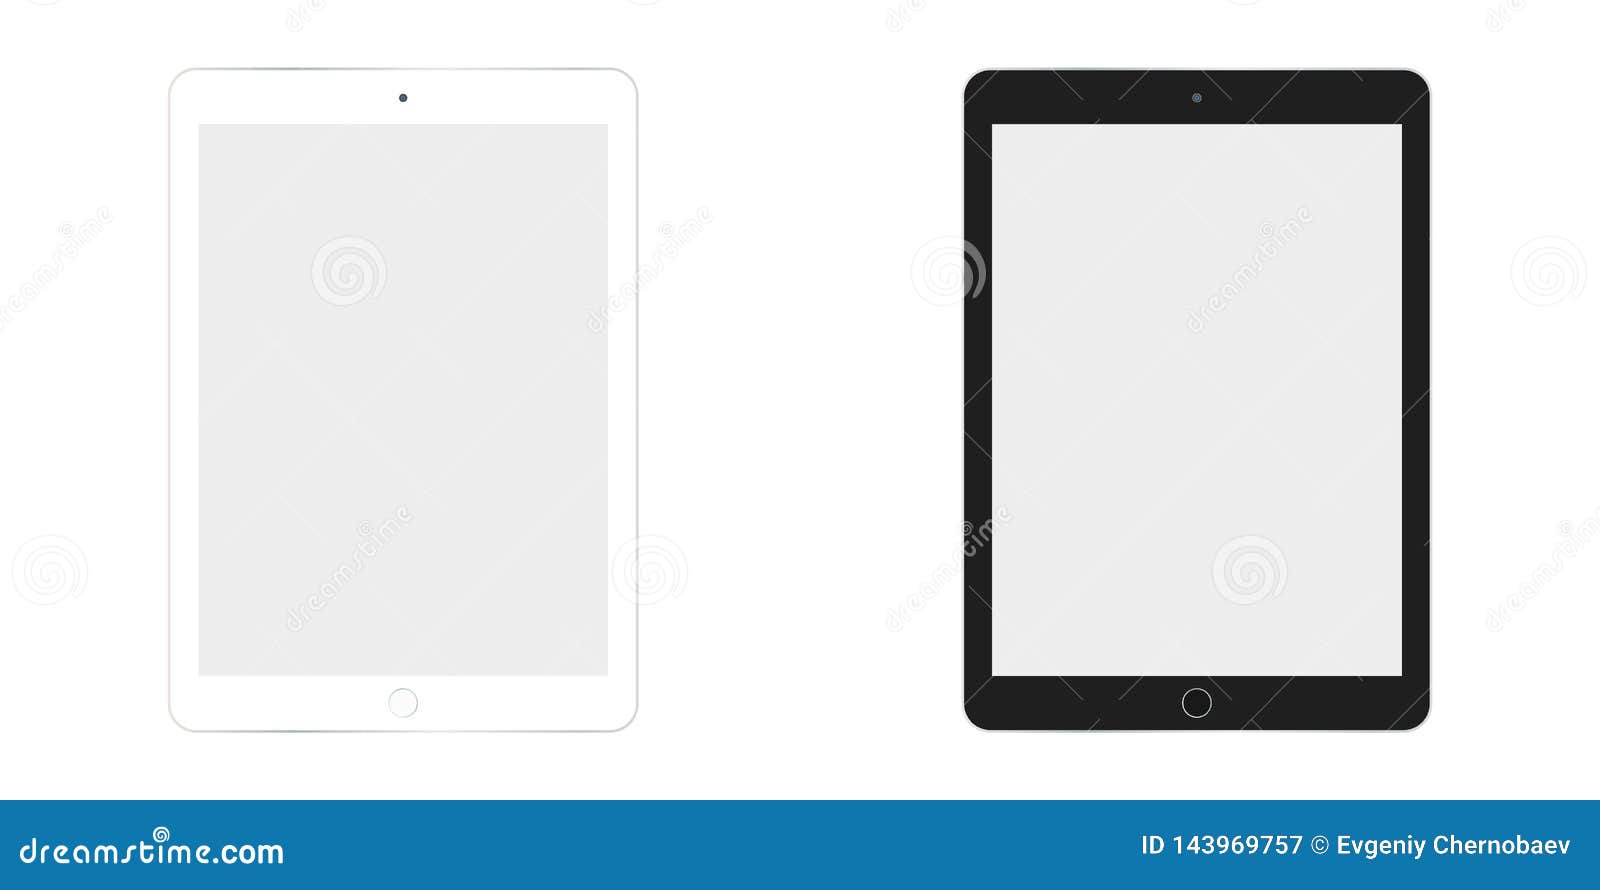 table ipad in white and black color  eps10. tablet flat style. two  tablet white and black set.